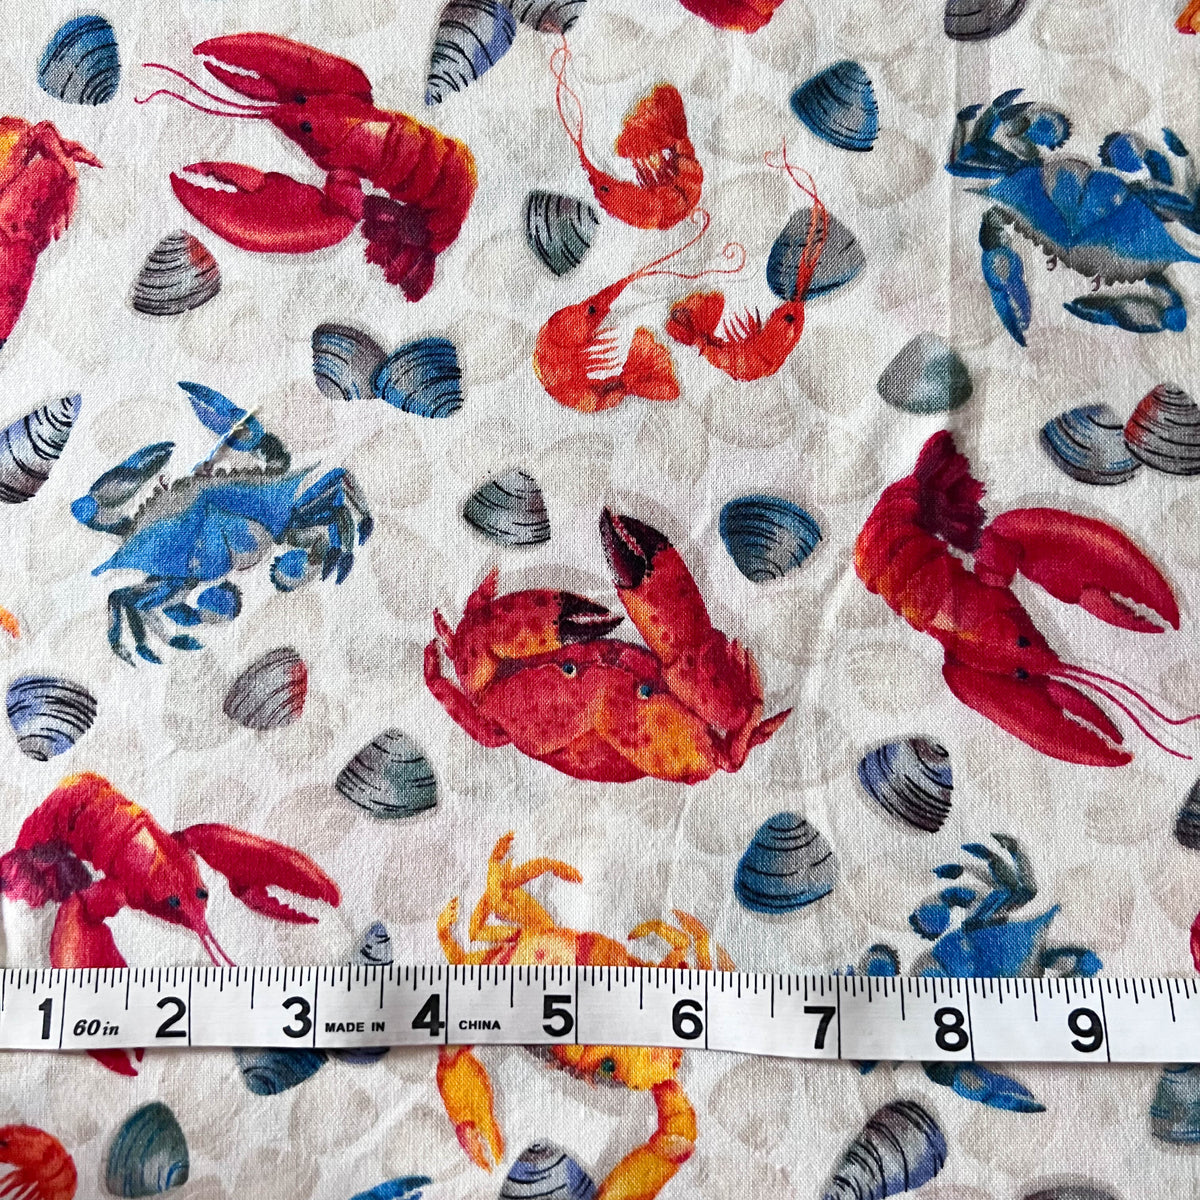 Lobsters + Crabs Fabric by Paul Brent - Out of Print Fabric - 1 Yard